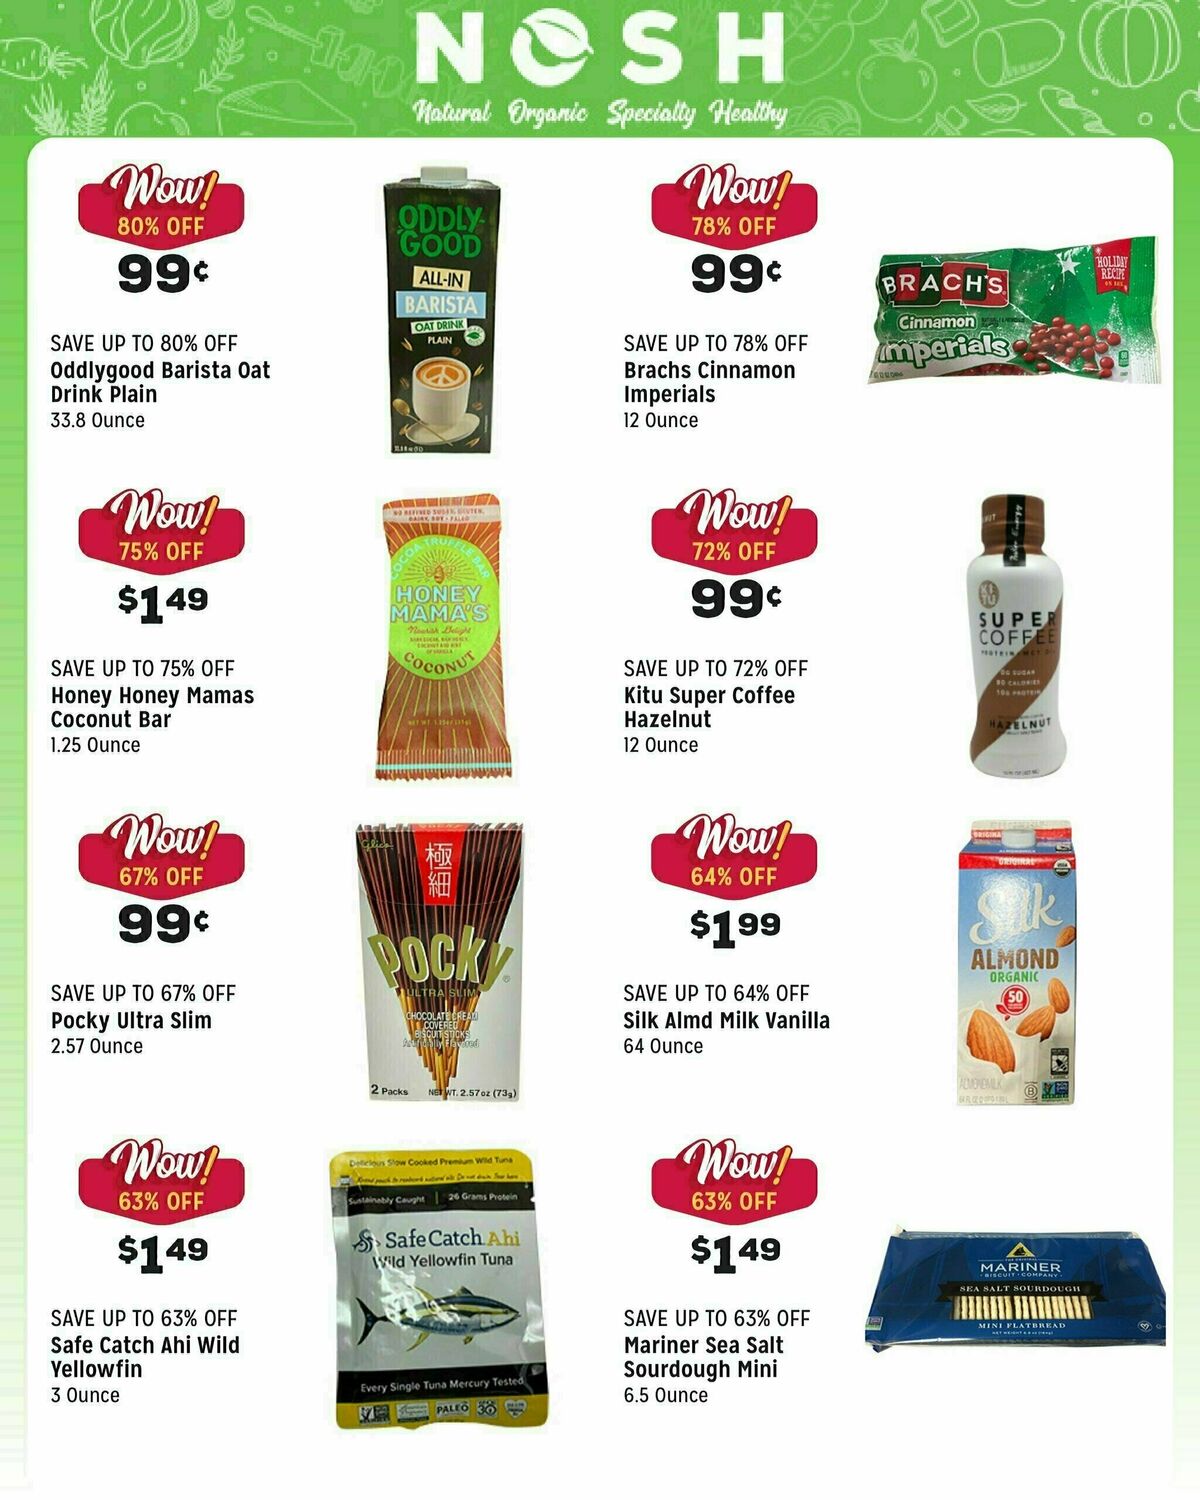 Grocery Outlet Weekly Ad from February 14